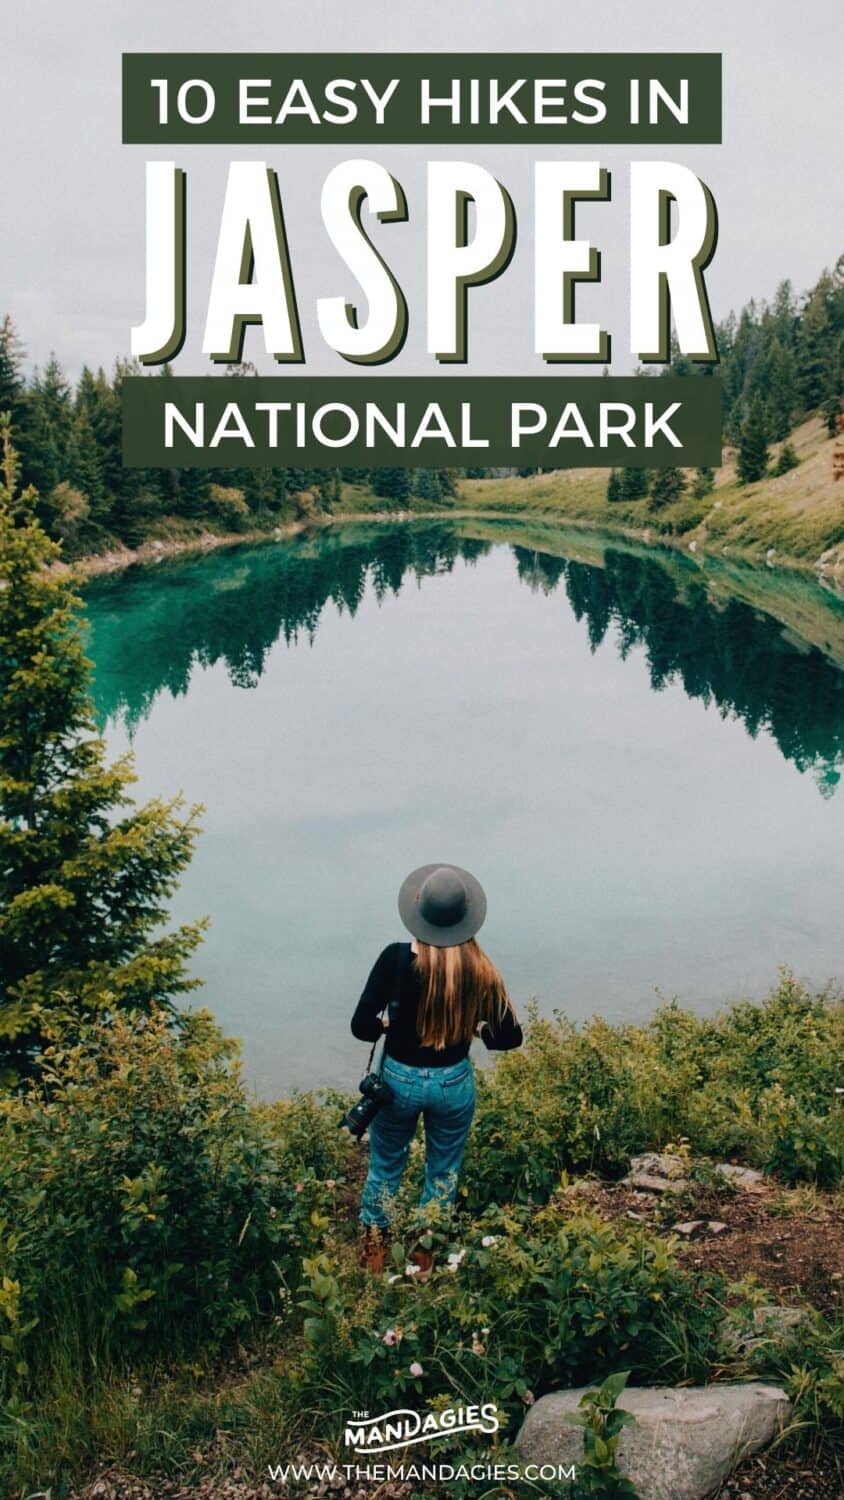 Discover some of the best and easiest hiking trails in Jasper National Park! It can sometimes be daunting to find Jasper hikes for kids, but these ones are easy enough for the whole family to enjoy! Save this for your next trip to Jasper National Park in Canada! #canada #jaspernationalpark #hiking #trails #jasper #canadianrockies #roadtrip #northamerica #travel